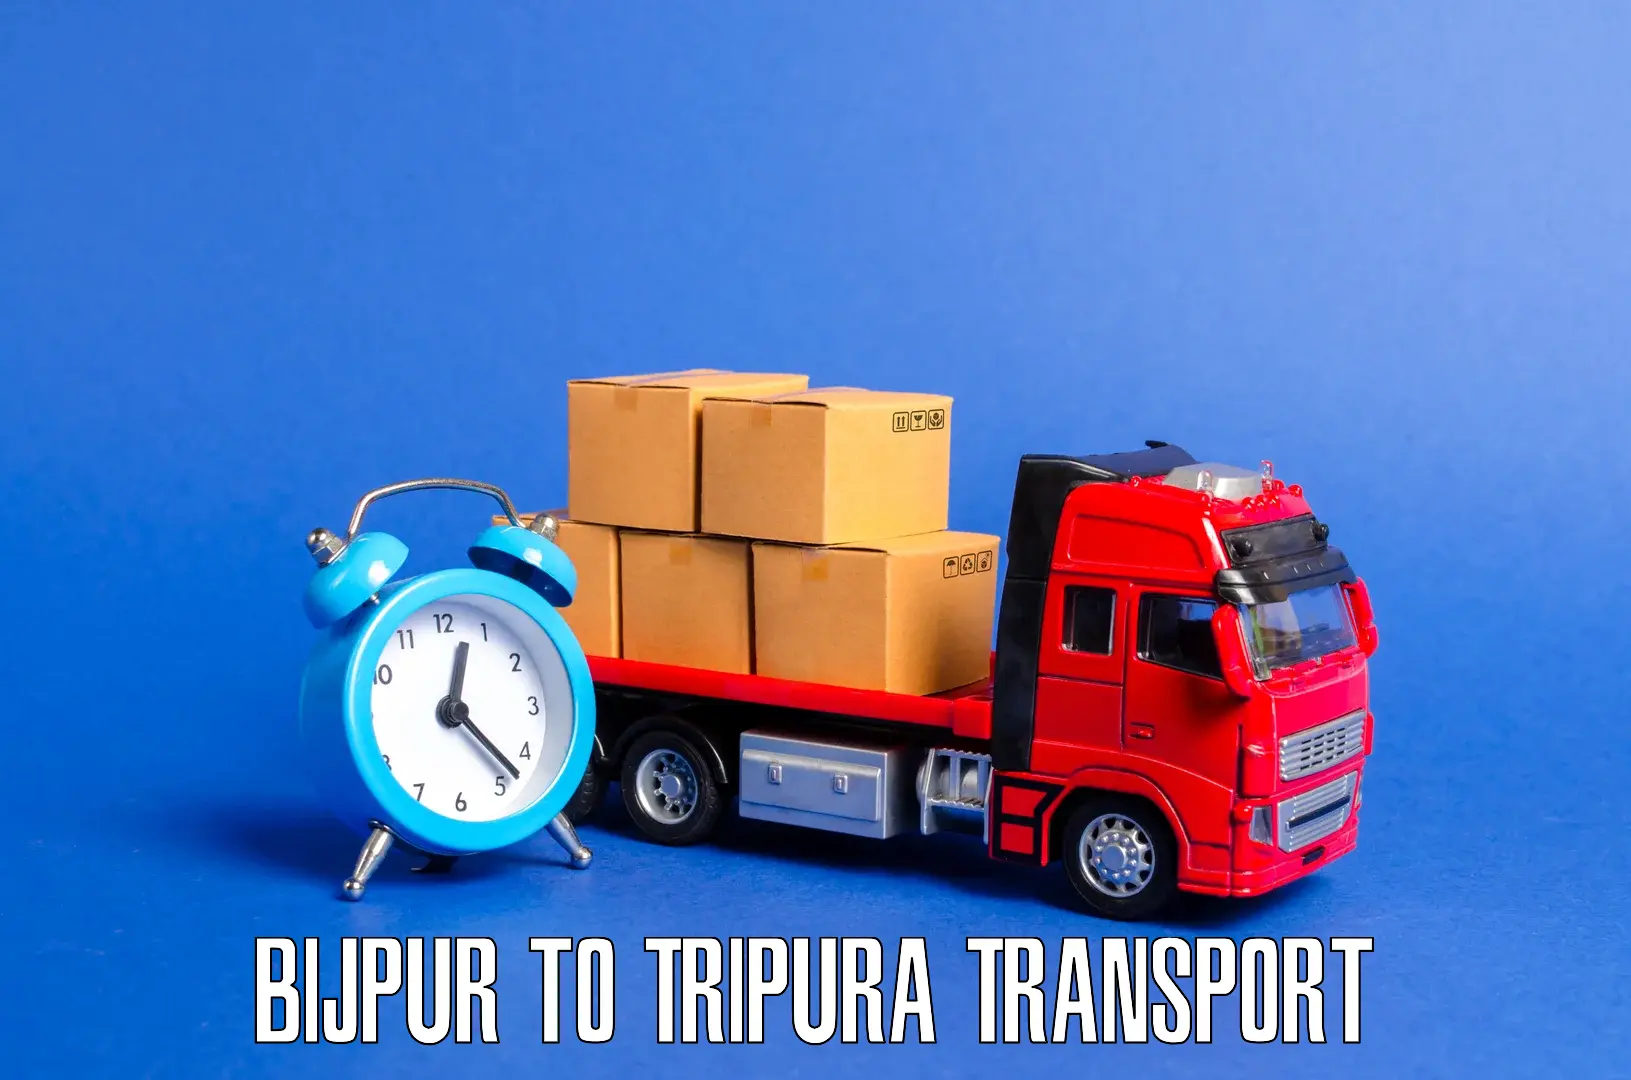 Part load transport service in India Bijpur to Udaipur Tripura